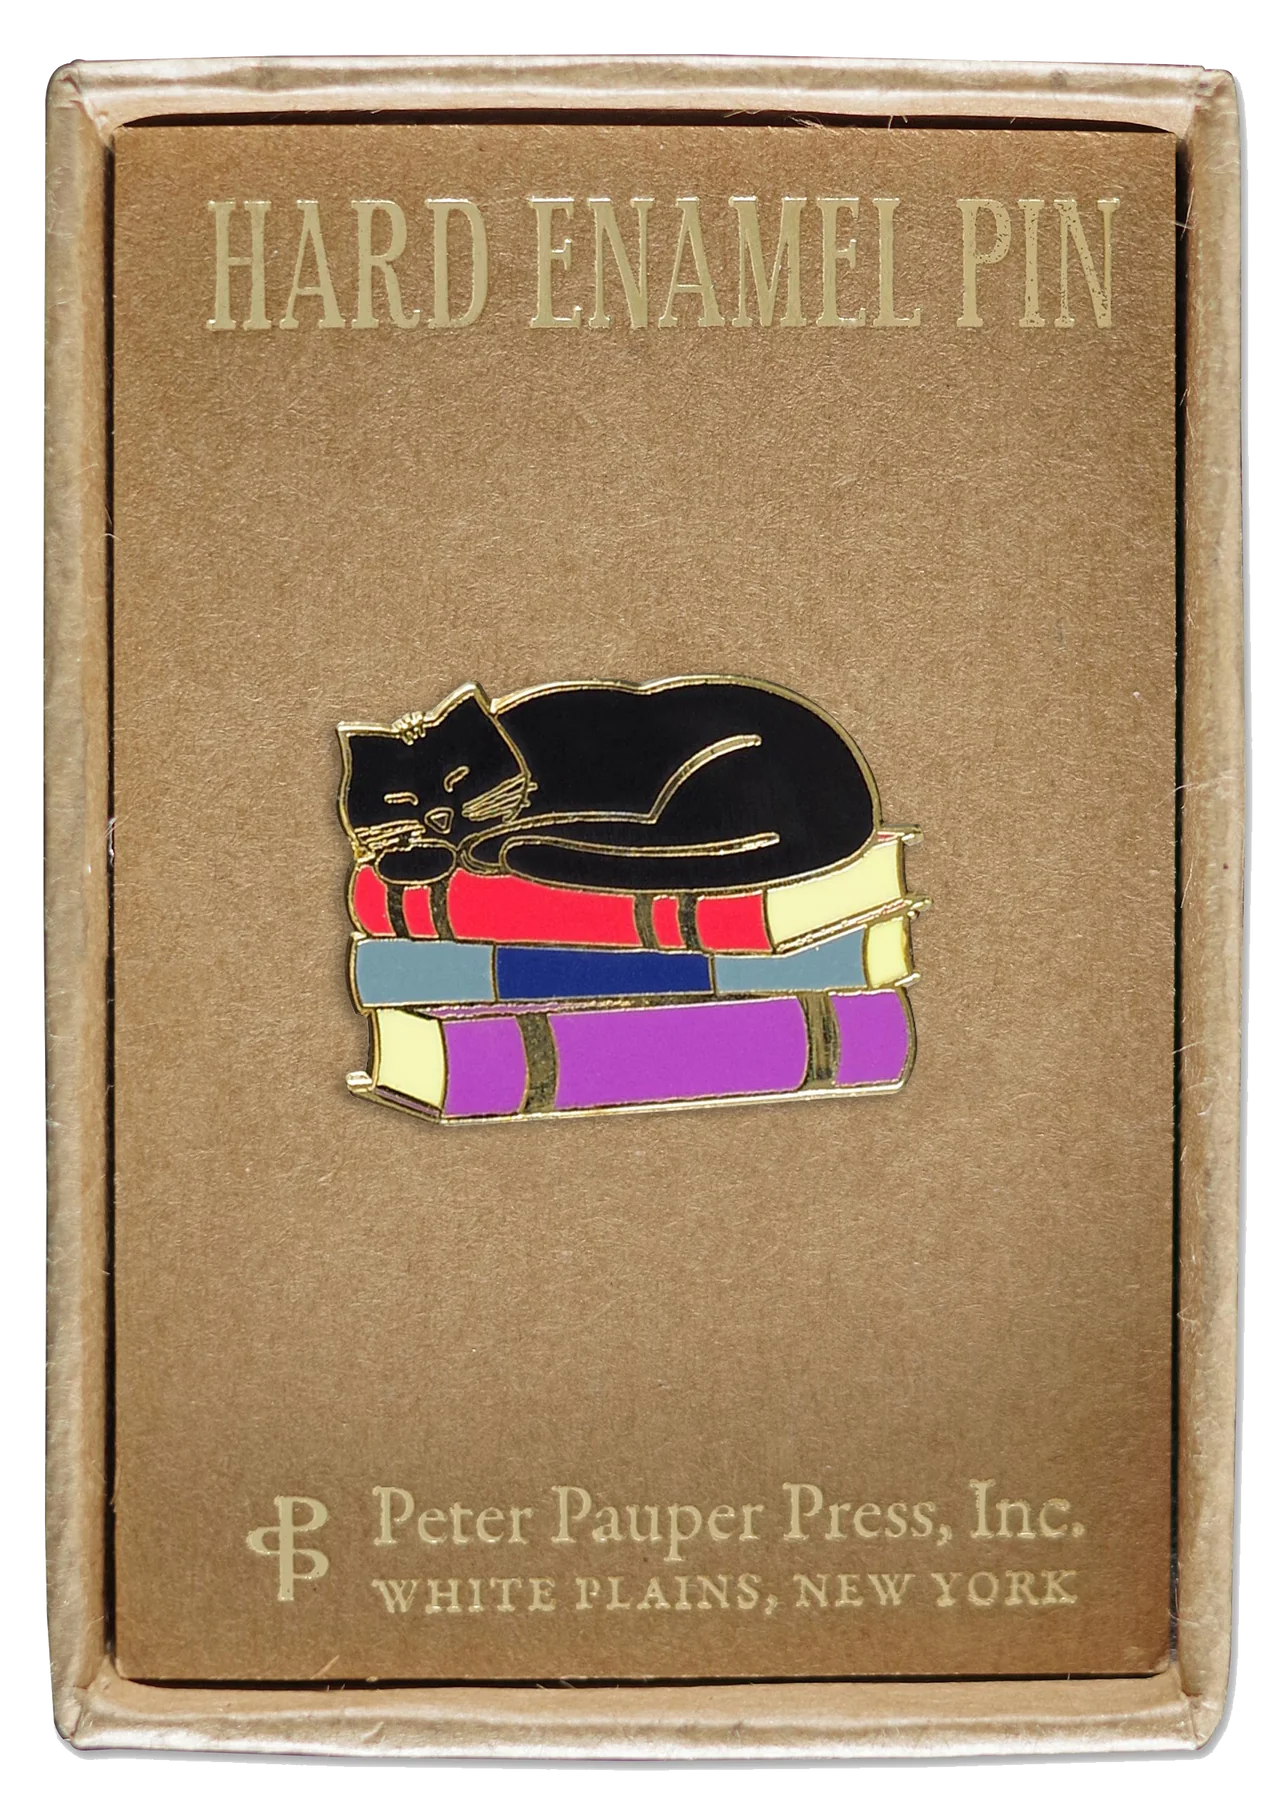 Black cat sleeping on top of three differently coloured books on box that says hard enamel pin